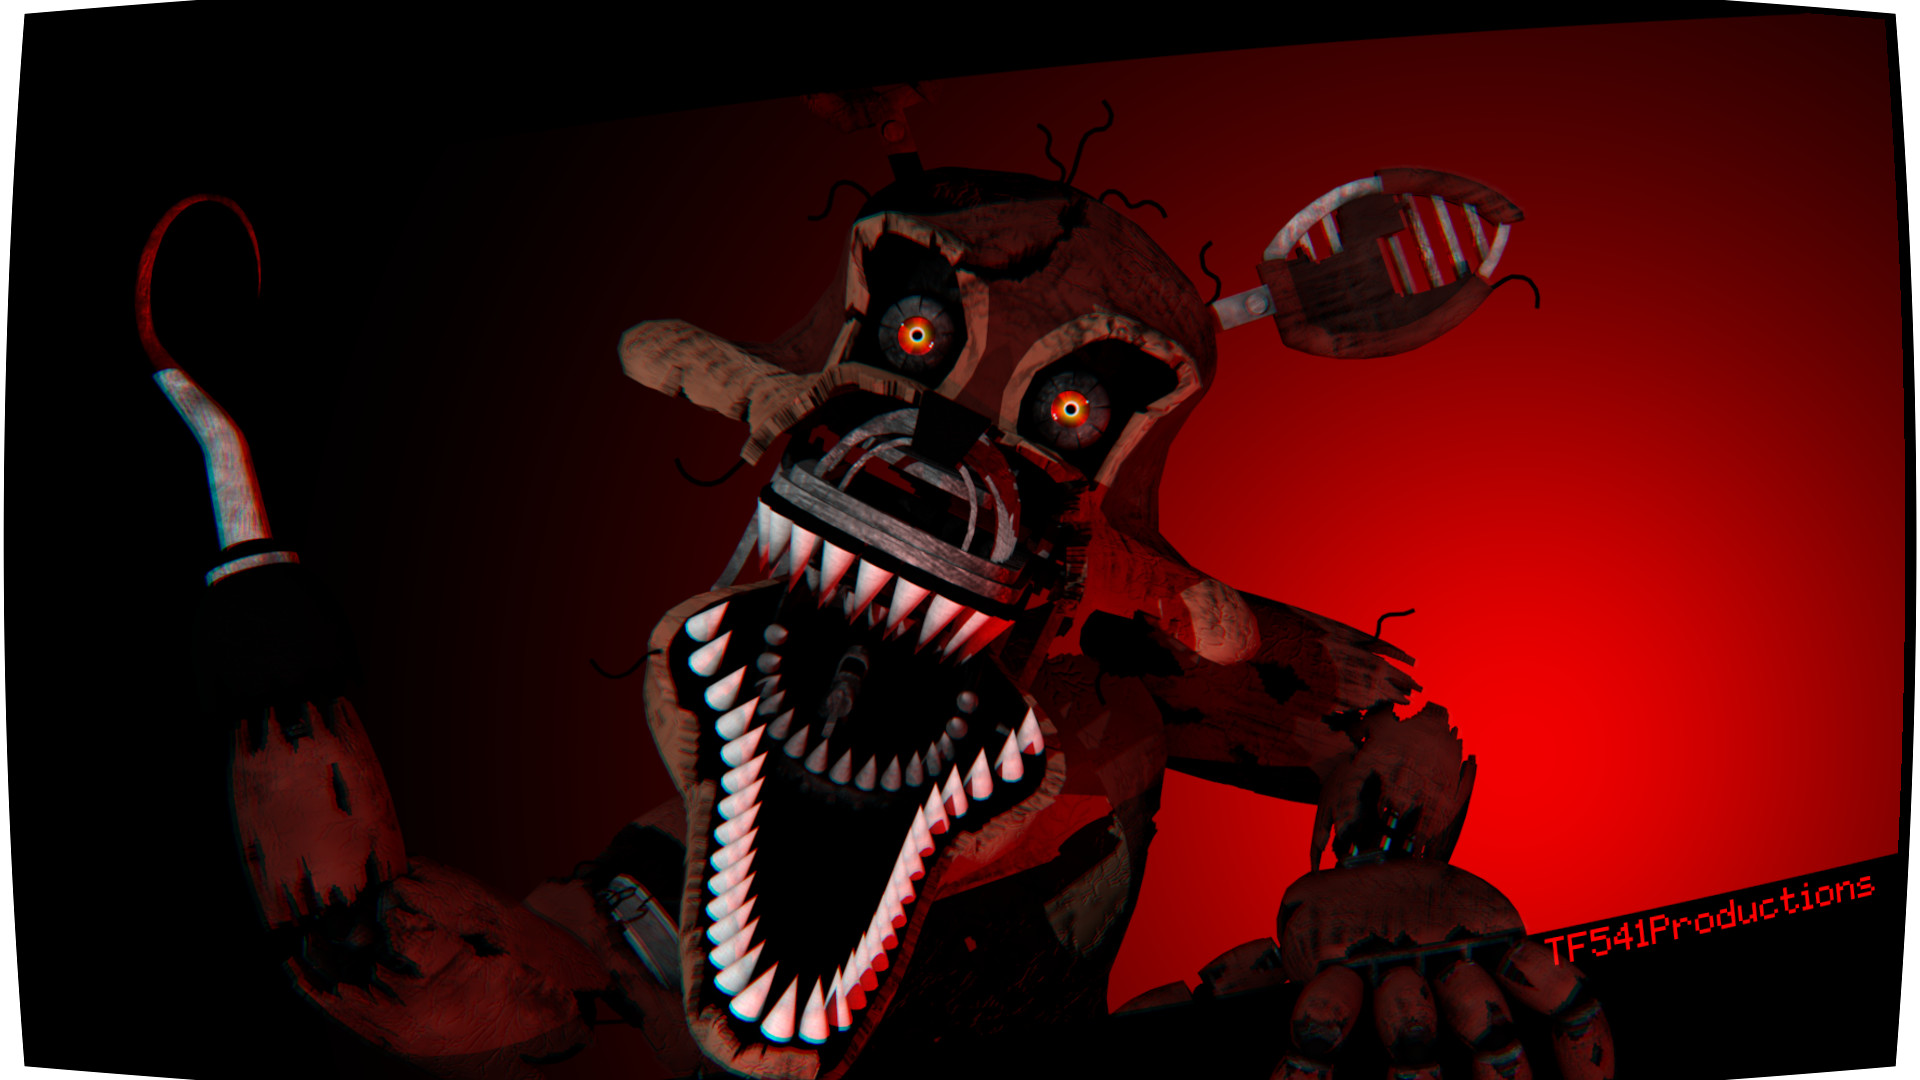 1920x1080 Made a simple Nightmare Foxy Wallpaper. (Model By: HectorMKG)